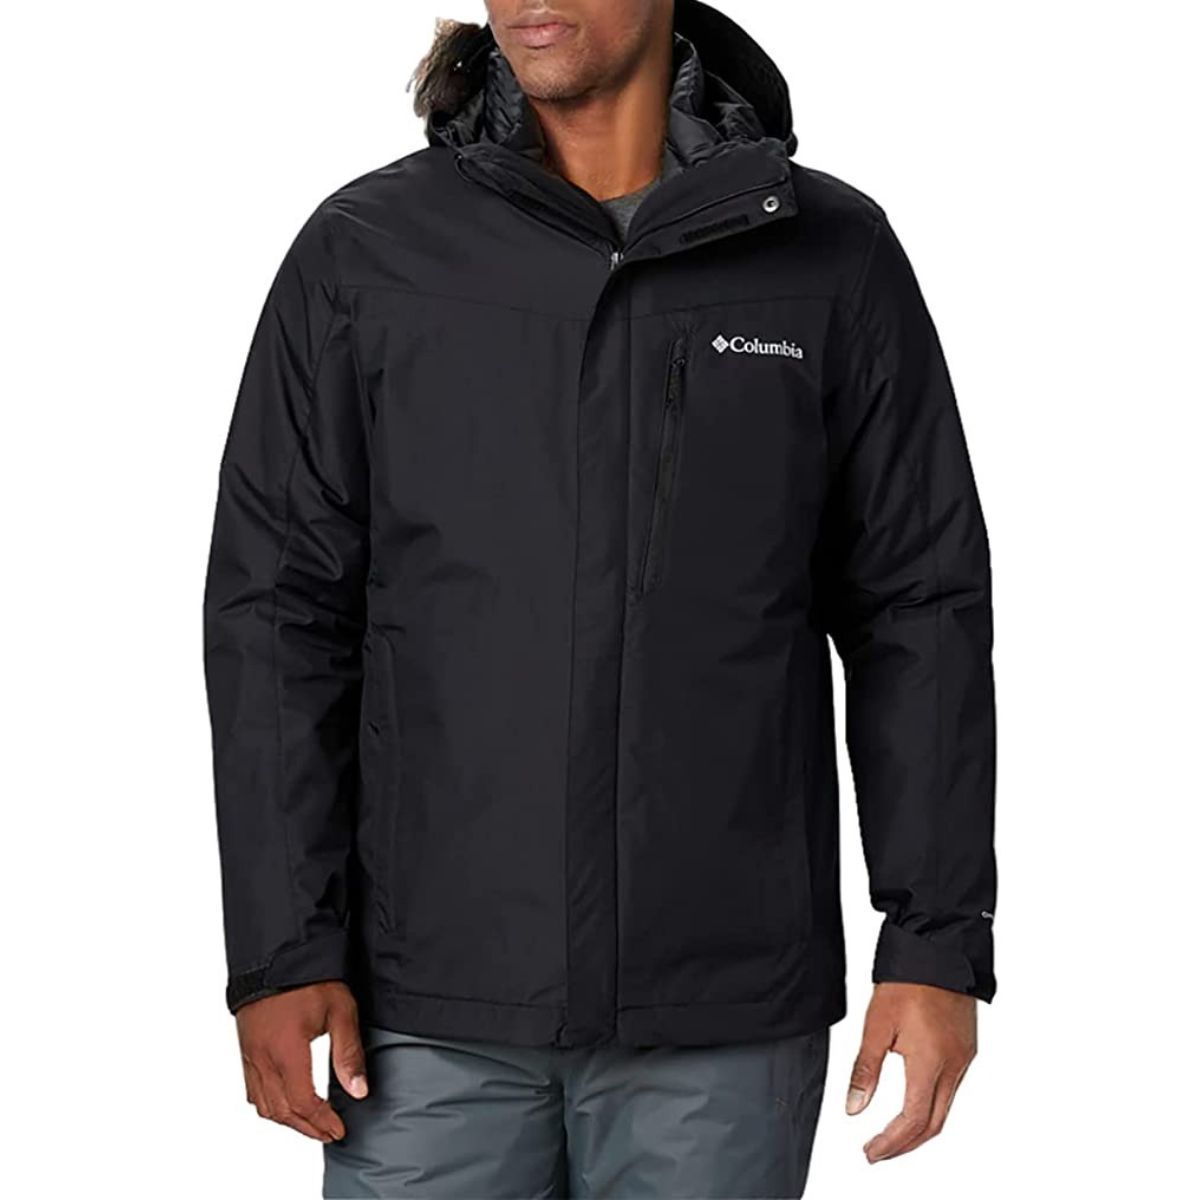 23 Best Ski and Snowboard Jackets for Men in 2023